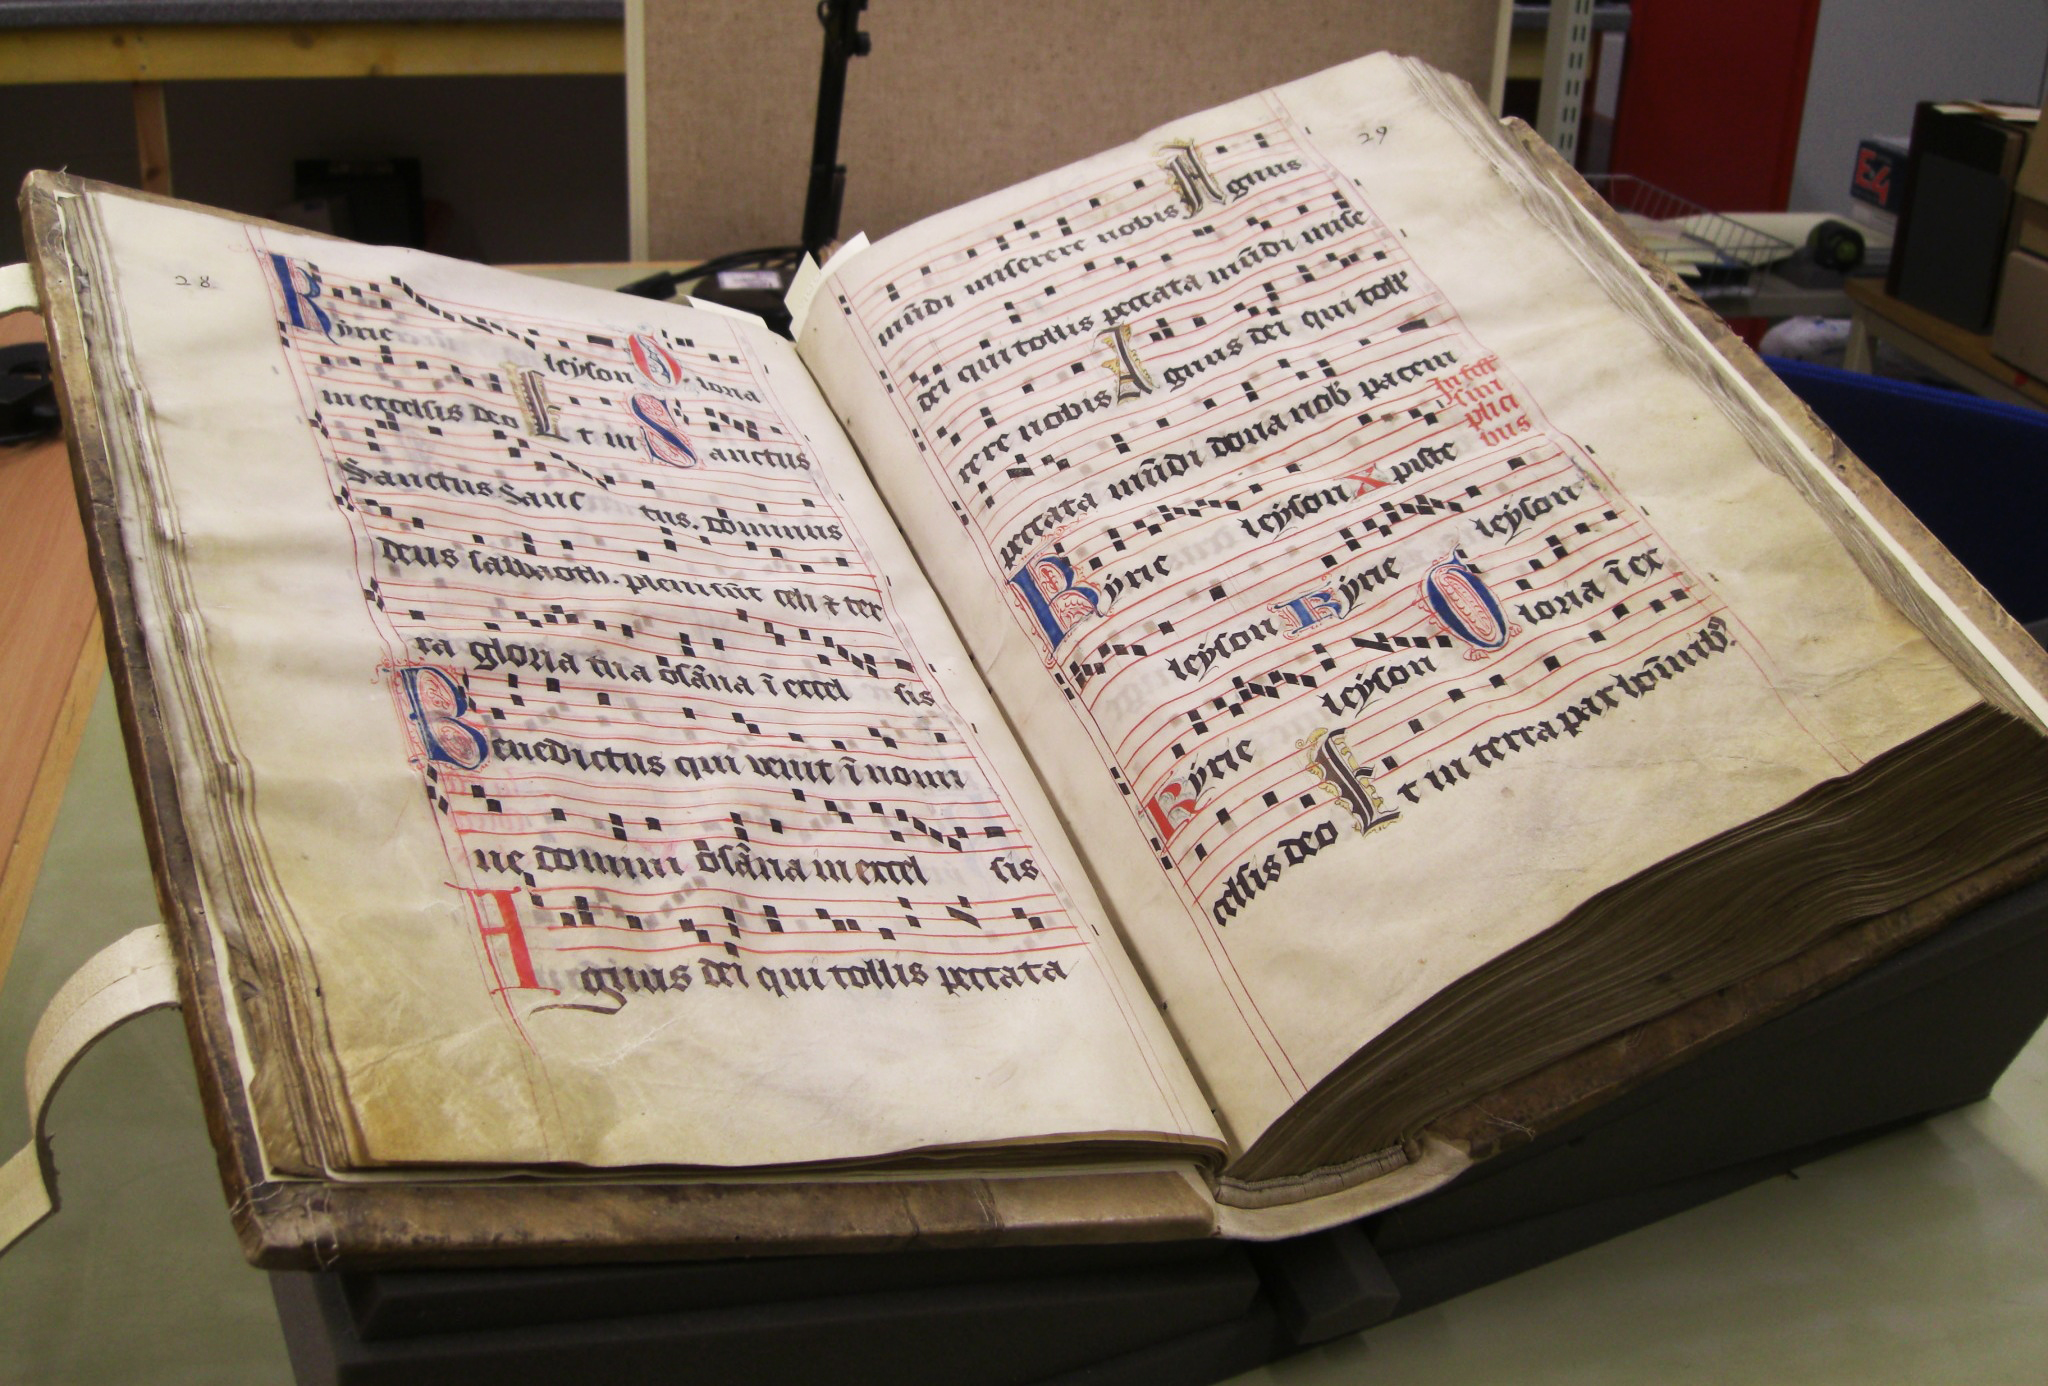 A 15th century Gradual, probably produced in the south of France. This is the University's second heaviest manuscript and it measures over half a metre tall! (St Andrews msM2148.G7)